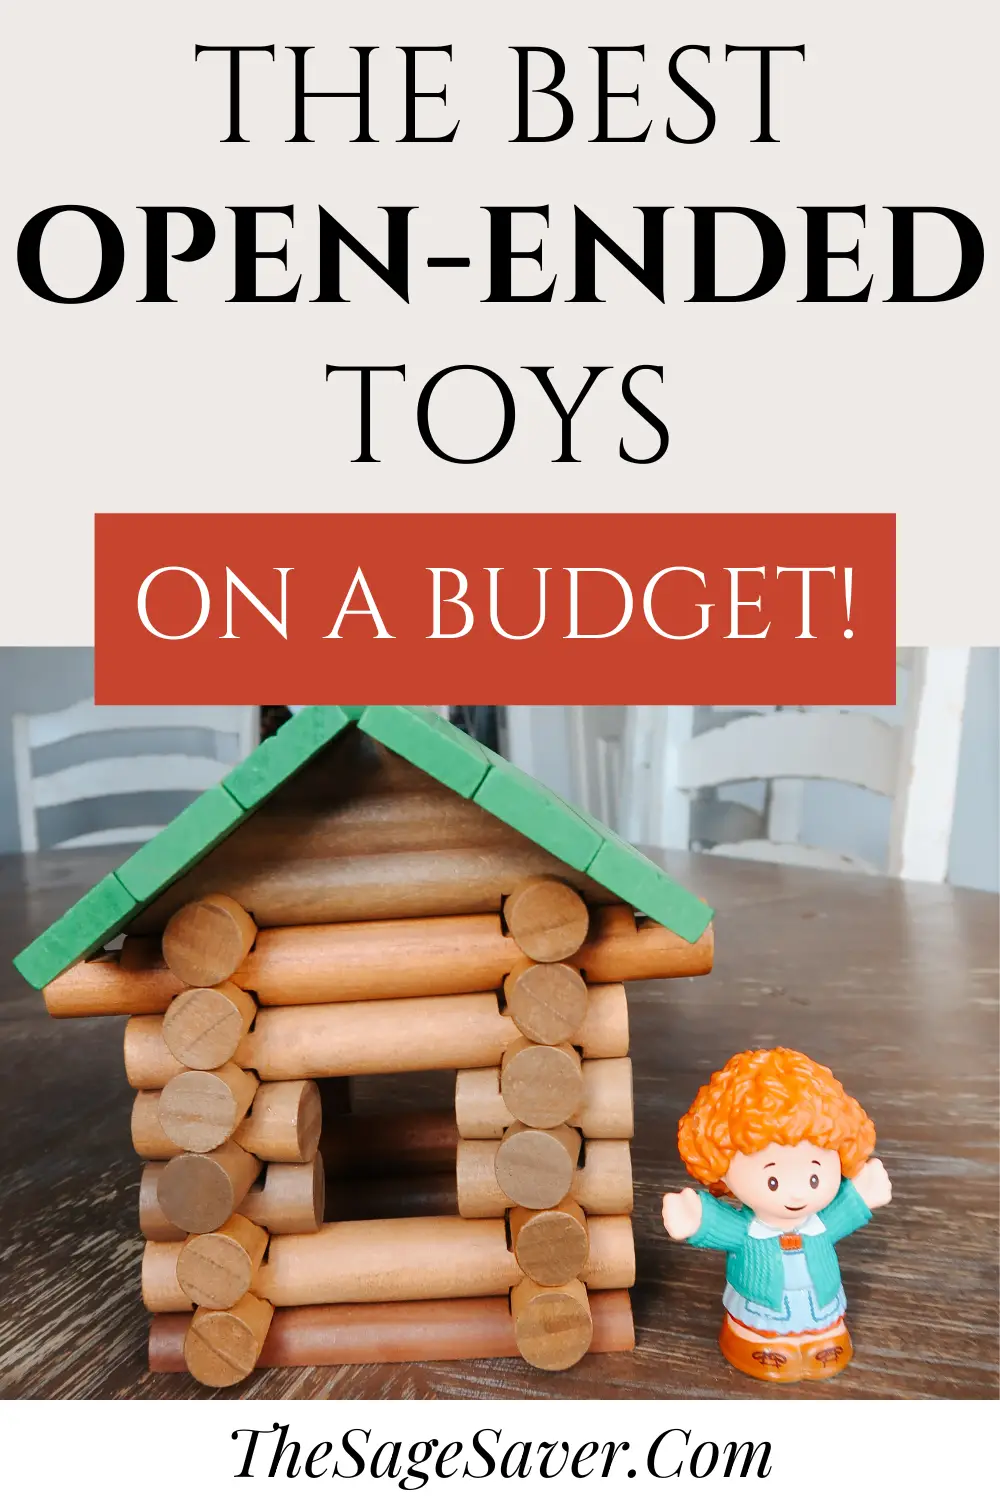 The Best Open-Ended Toys on a Budget